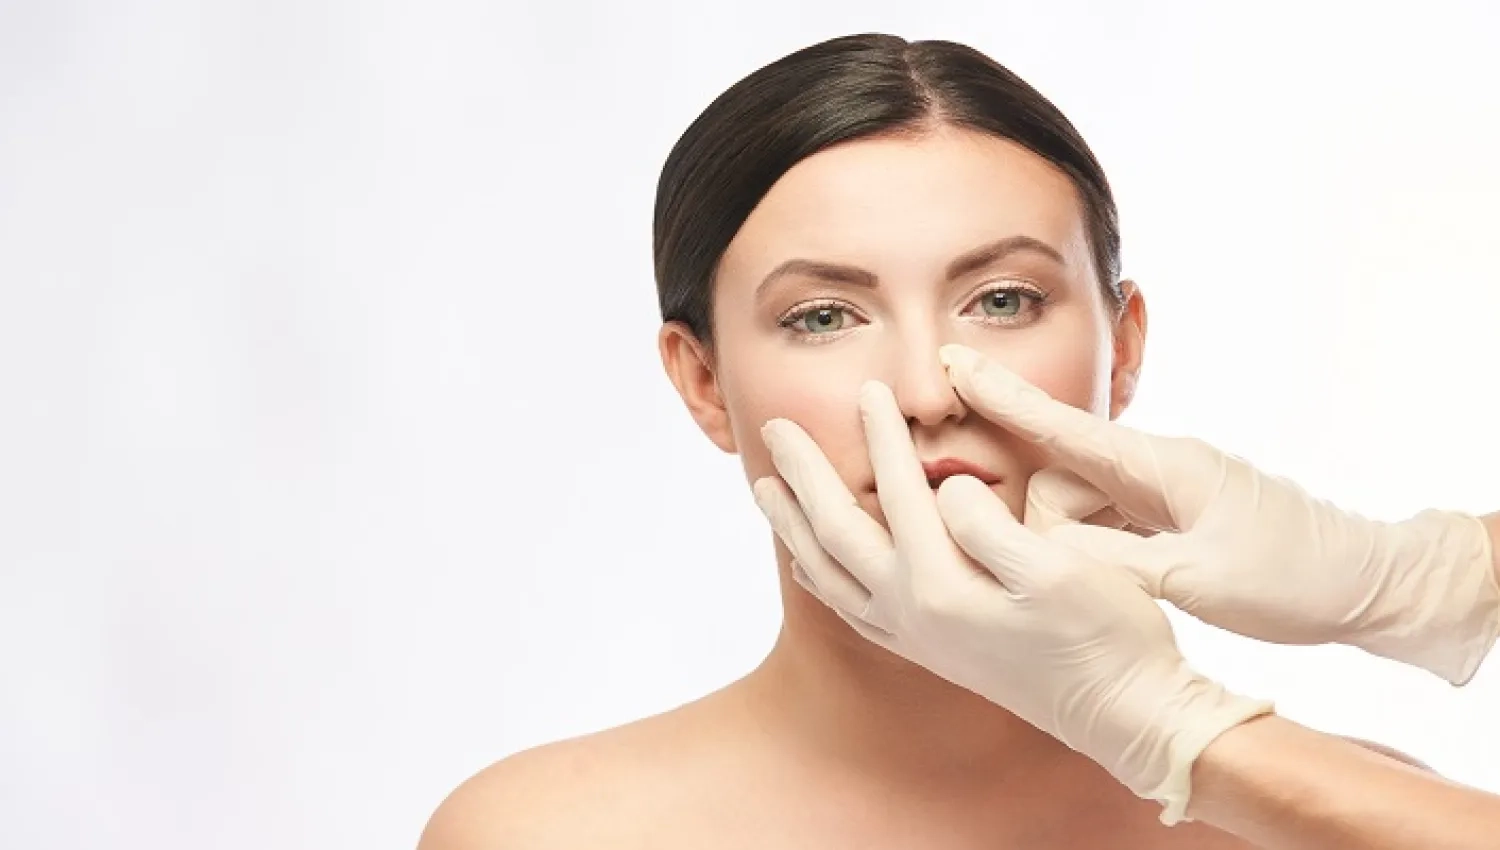 Non-Surgical Rhinoplasty Can Be Performed With Fillers